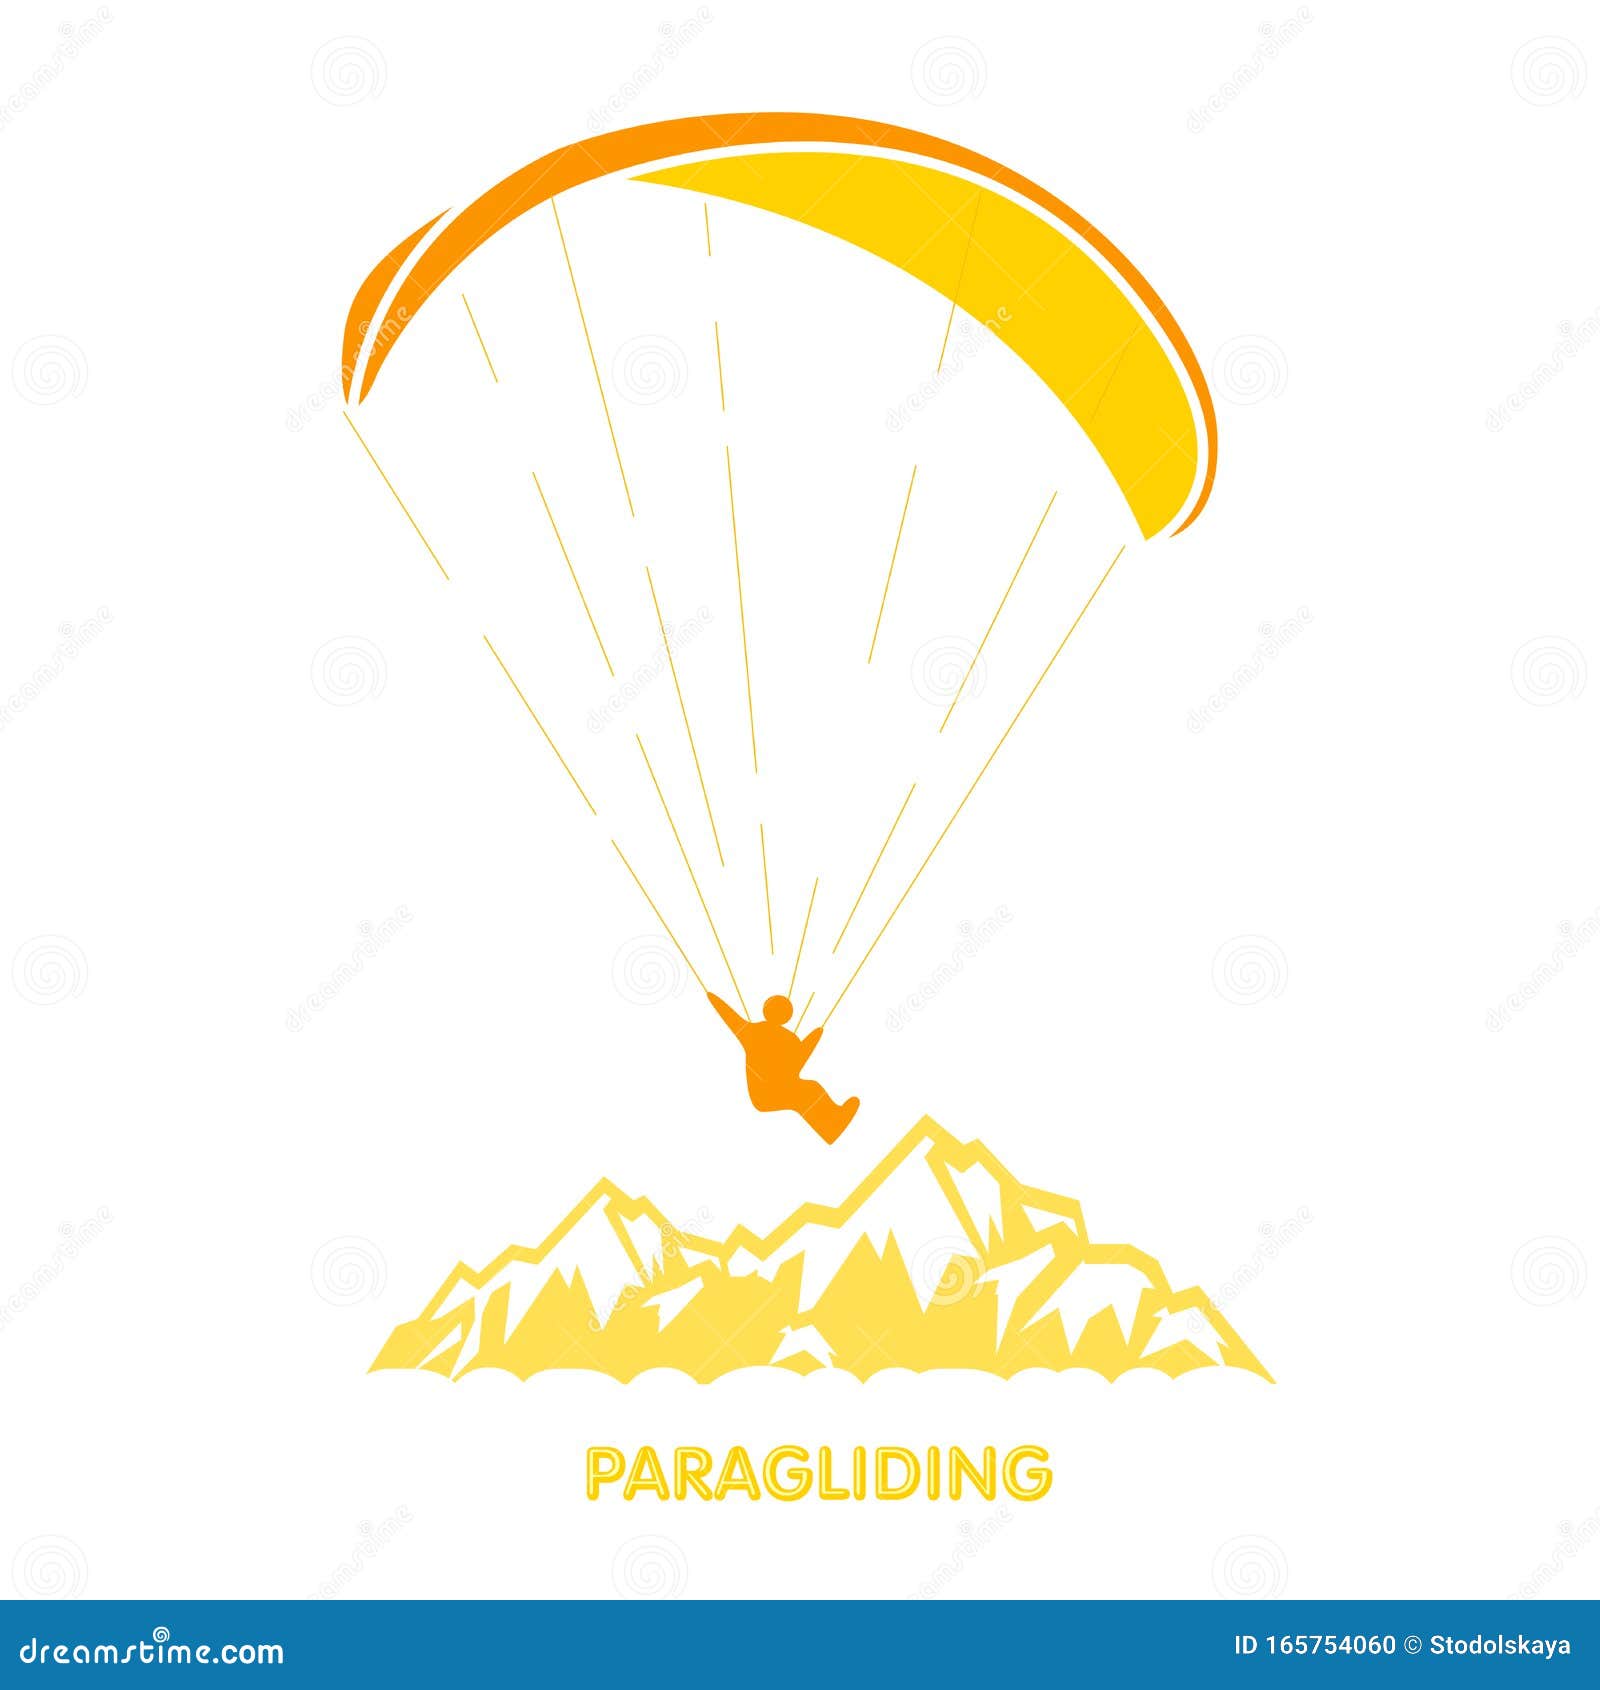 paragliding logo with skydiver flying over mountains, parachutist